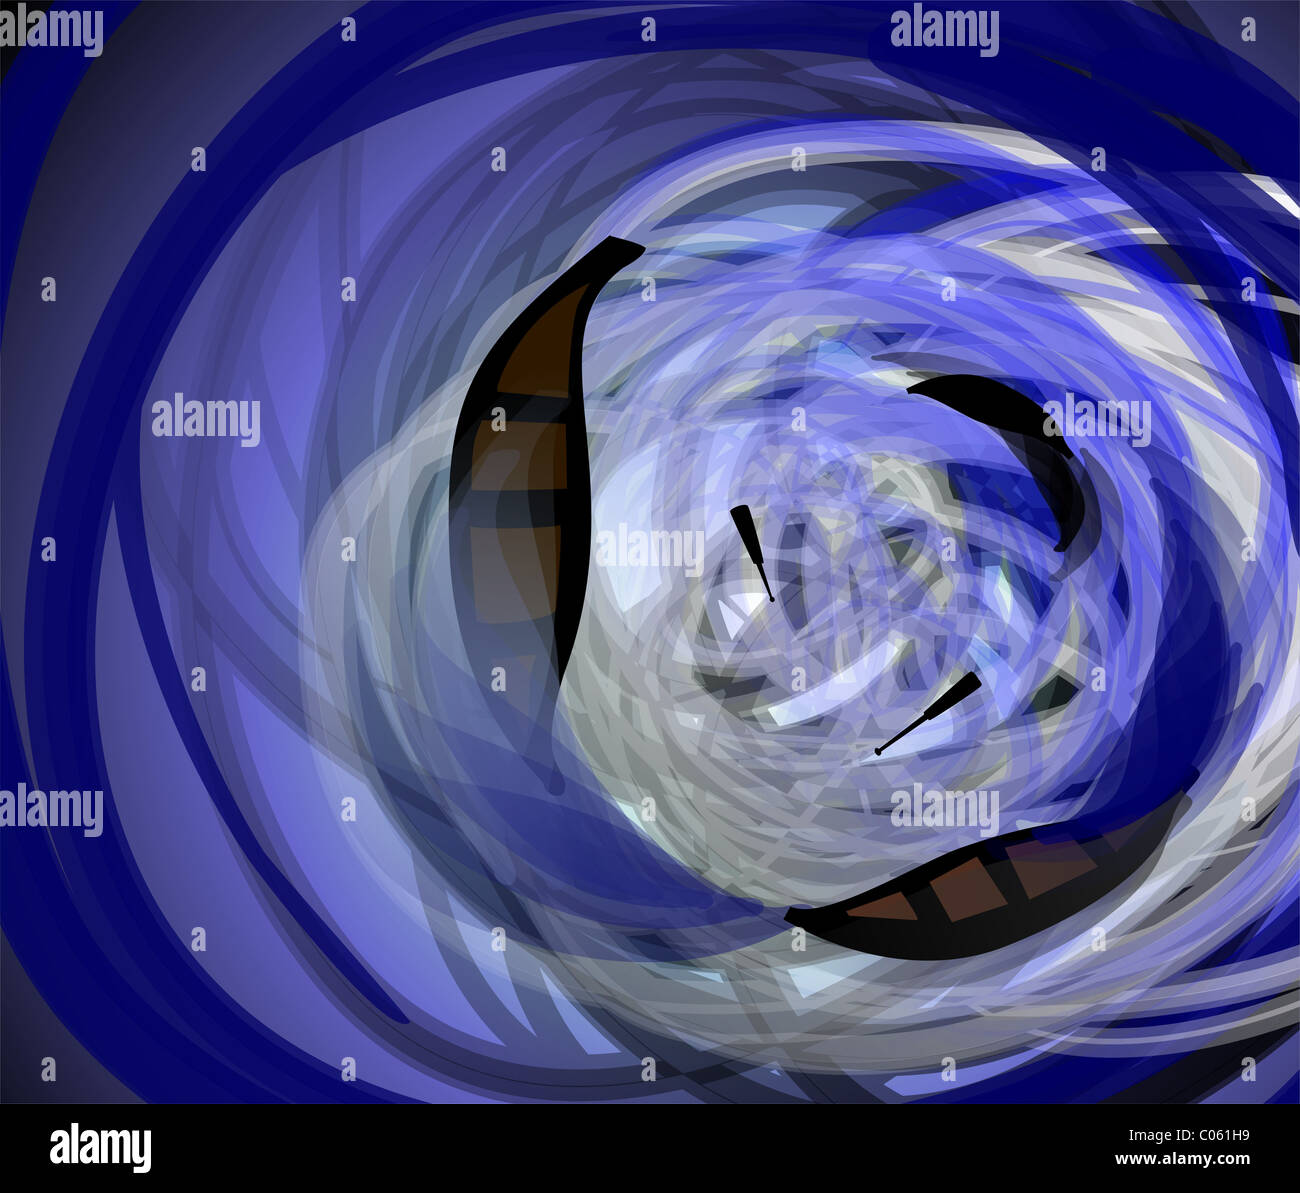 Digital painting of swirling water. The artist is feeling a sense of fear seeing the swirl. Stock Photo